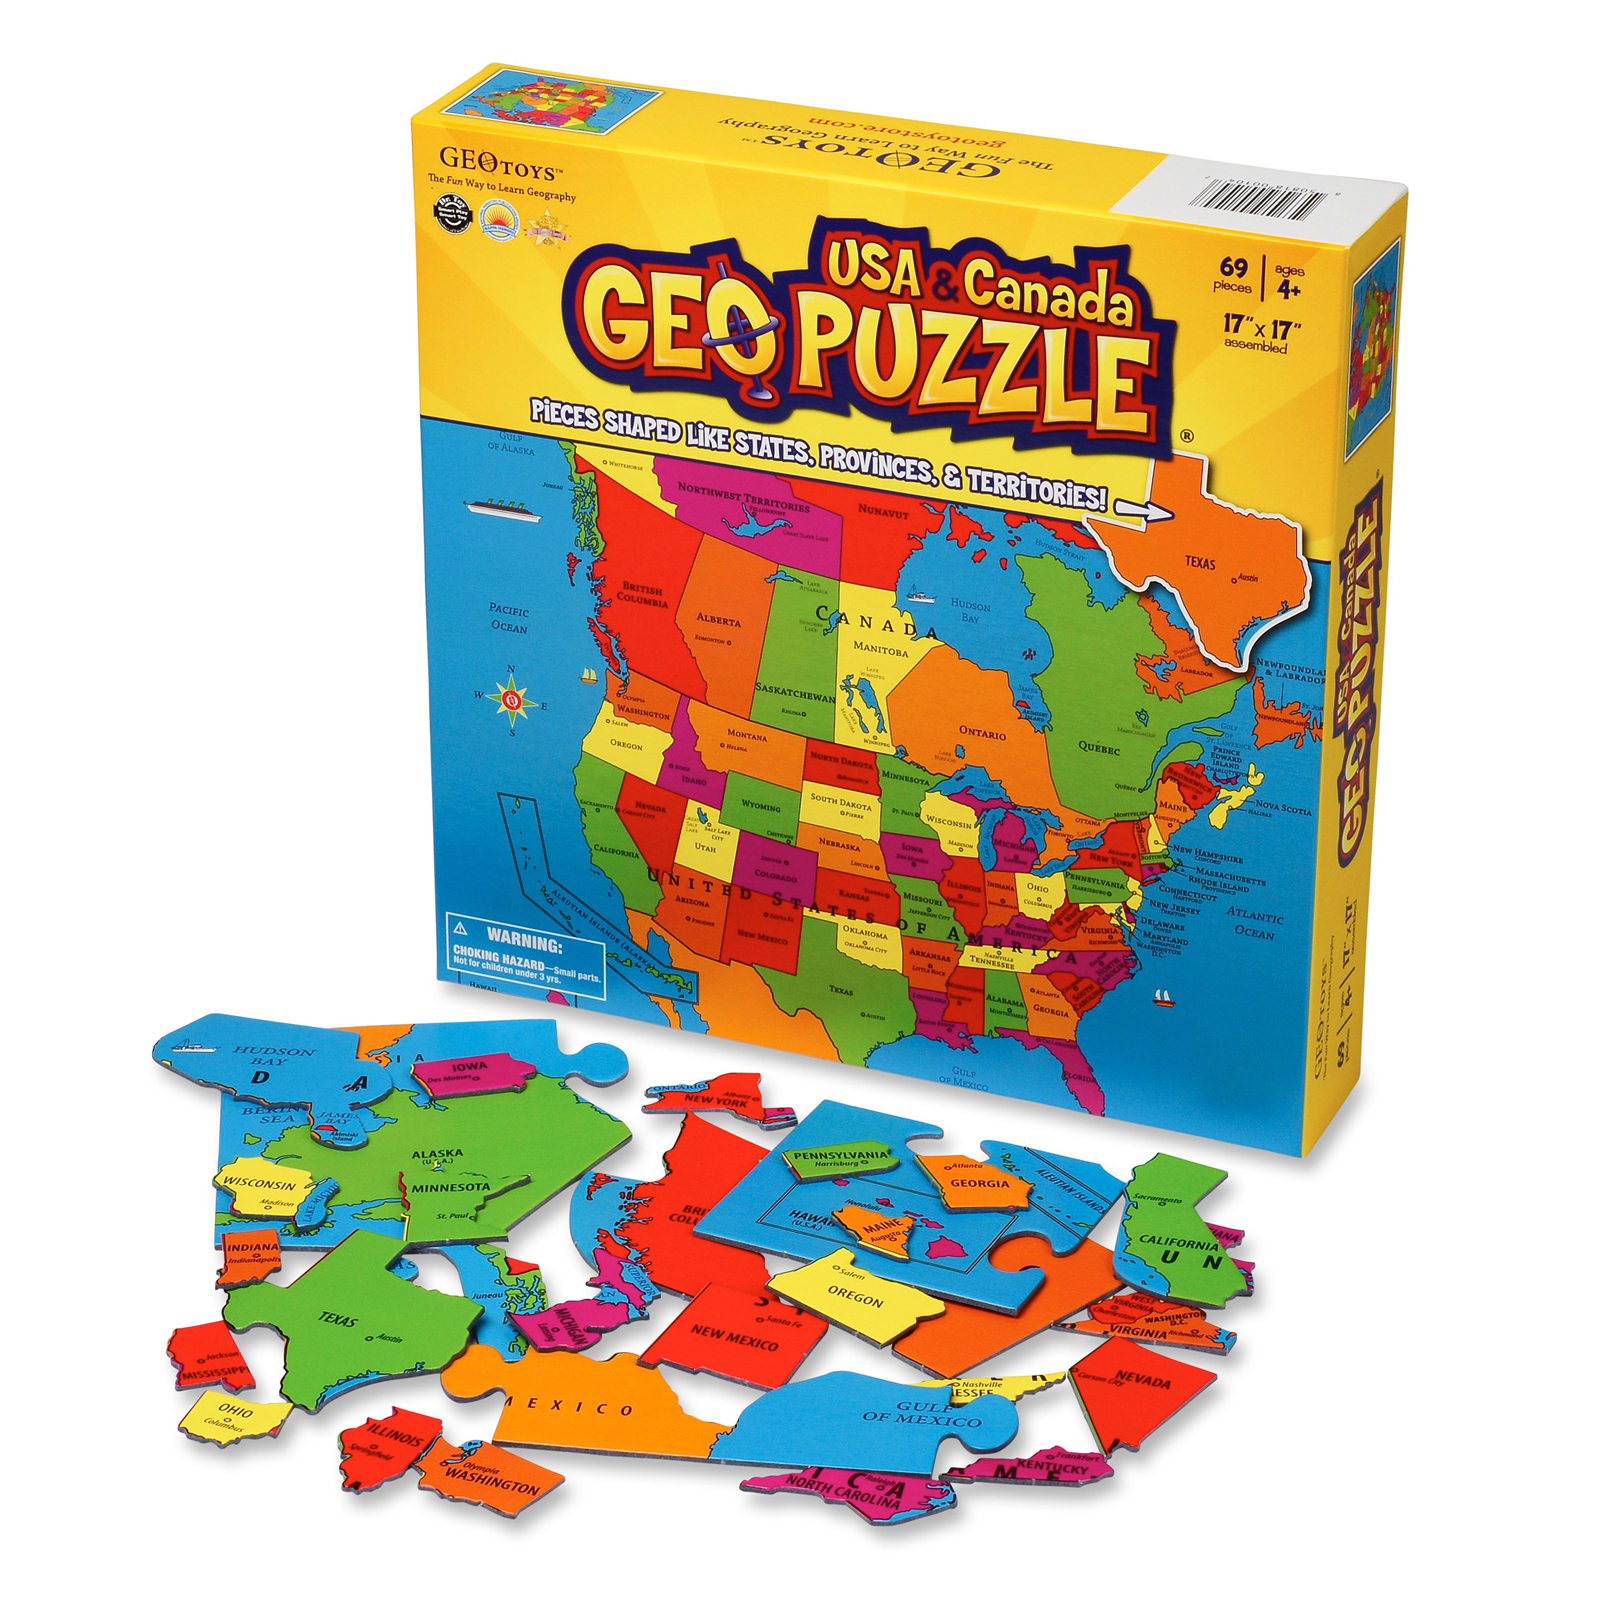 GEO TOYS GeoPuzzle USA and Canada